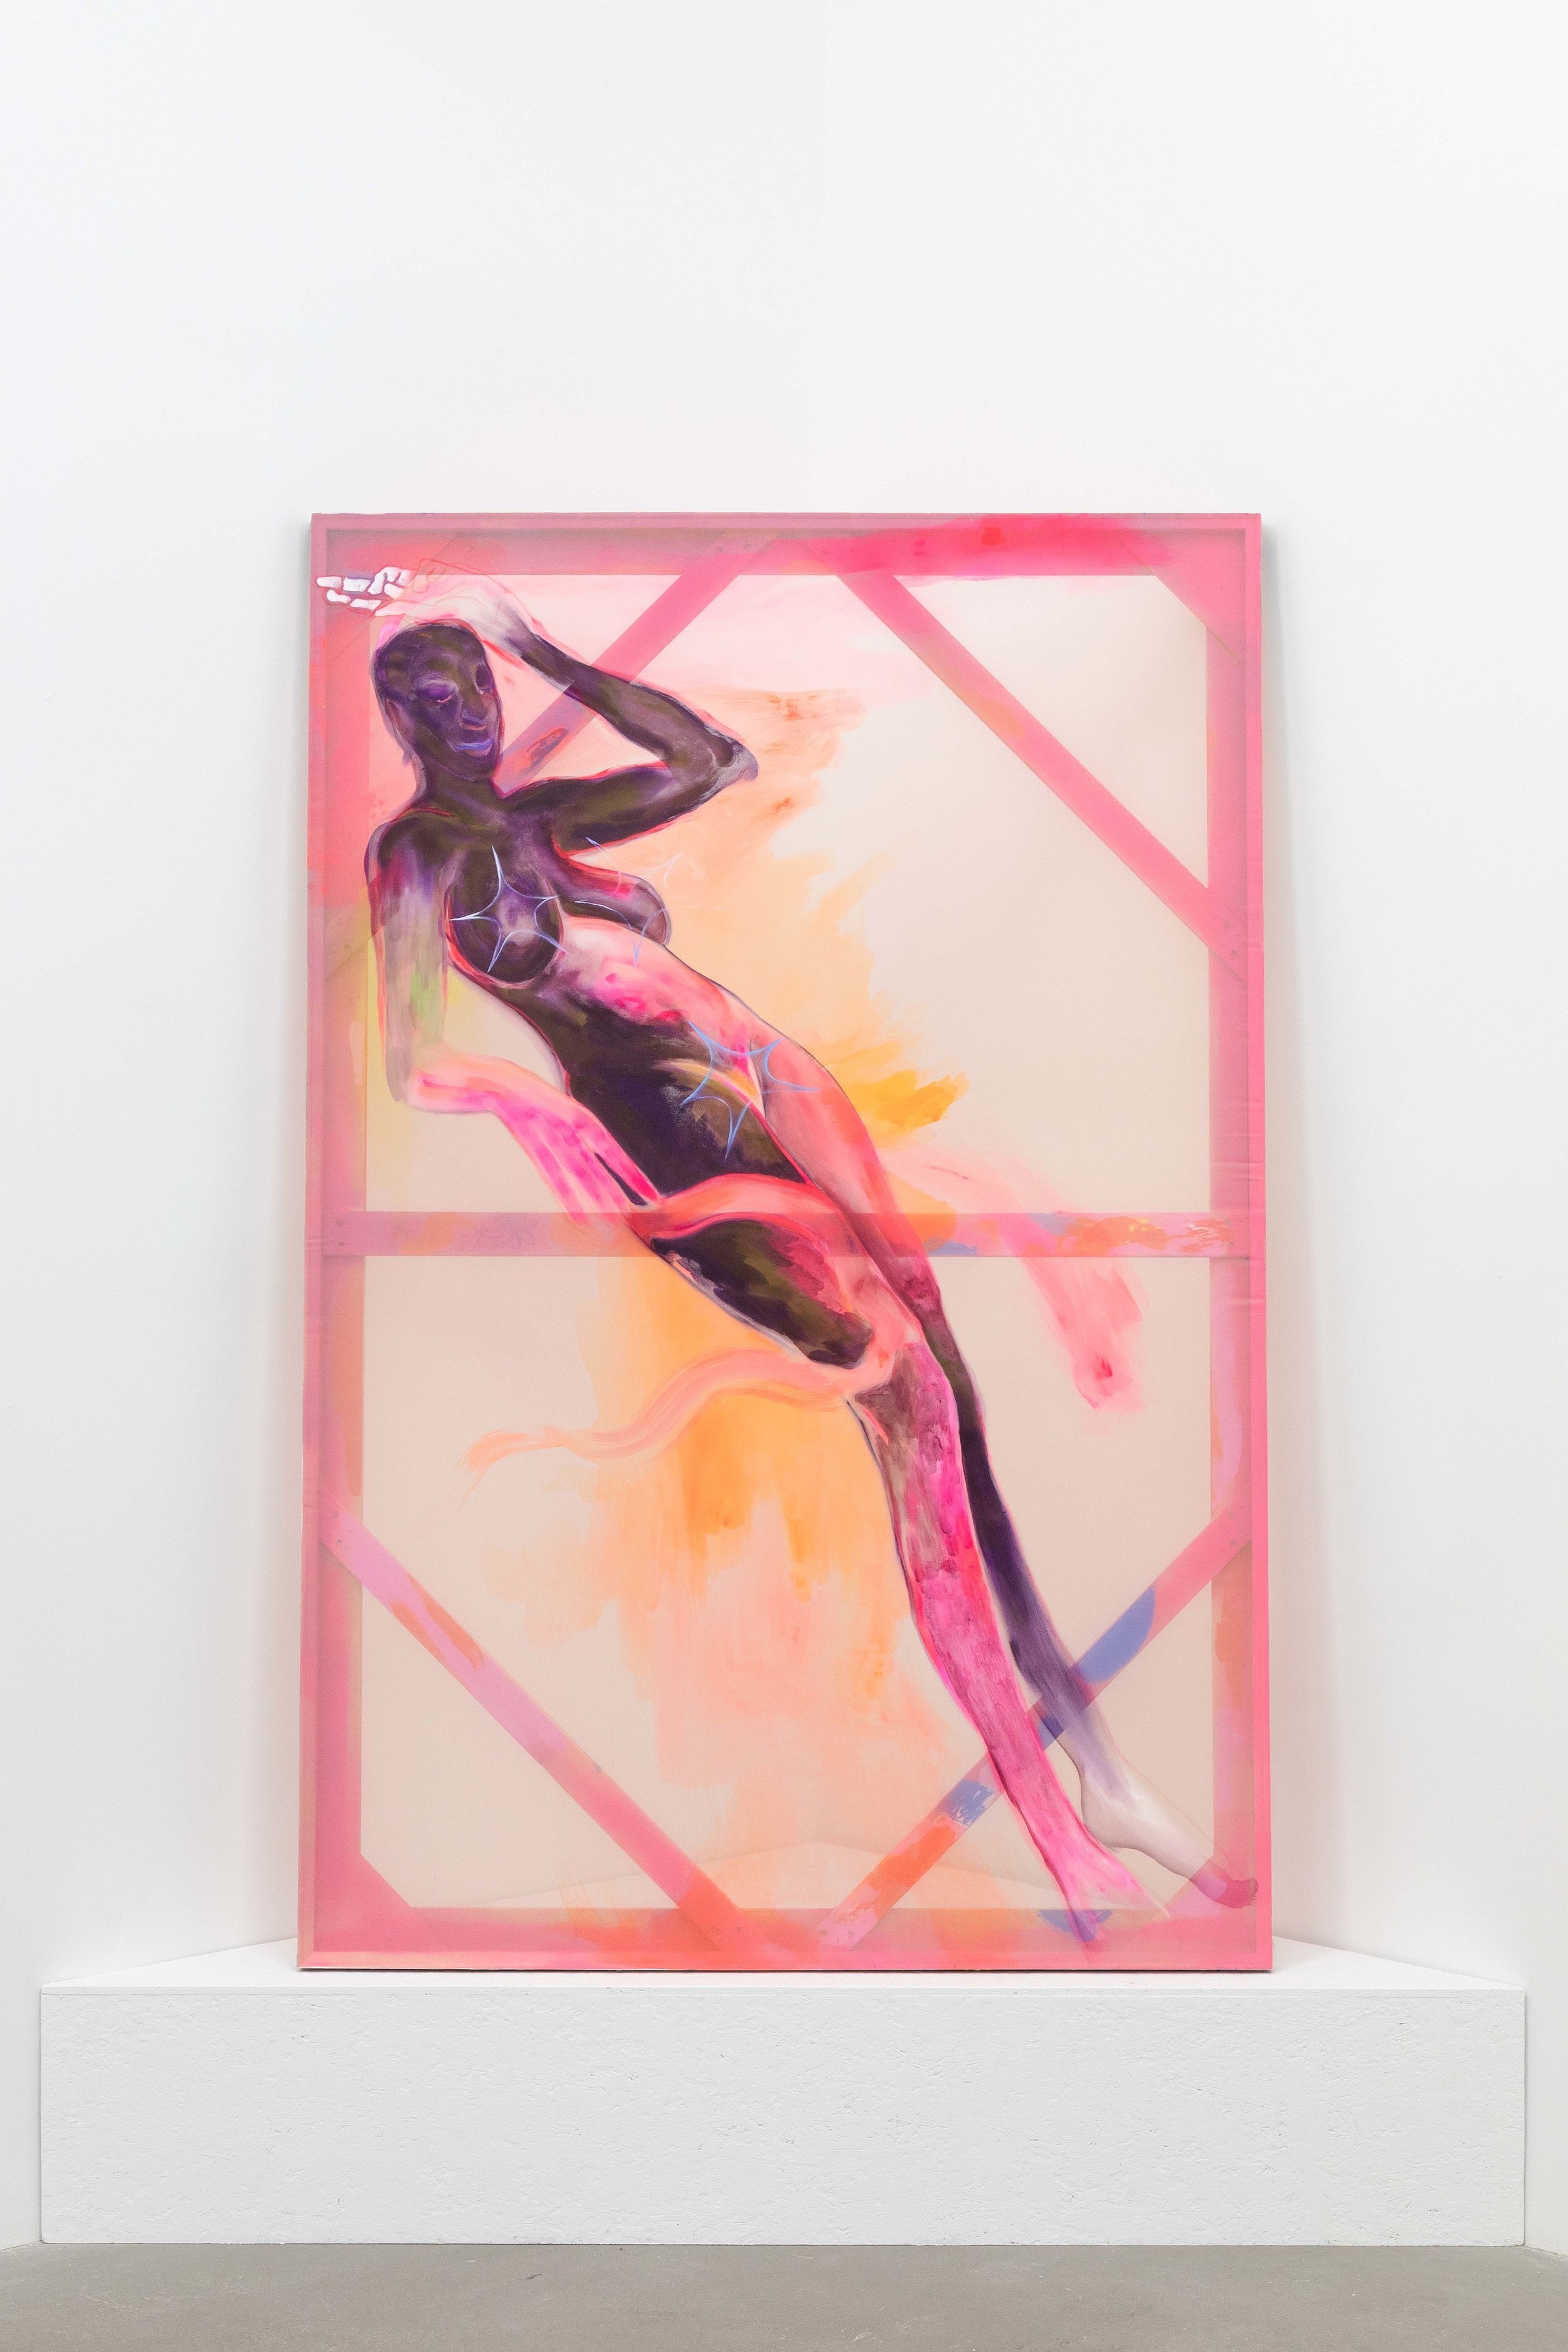  Curtia Wright,  Held together by own gravity , 2019 Oil and acrylic on Organza fabric 72 x 48 in (182.9 x 121.9 cm) 